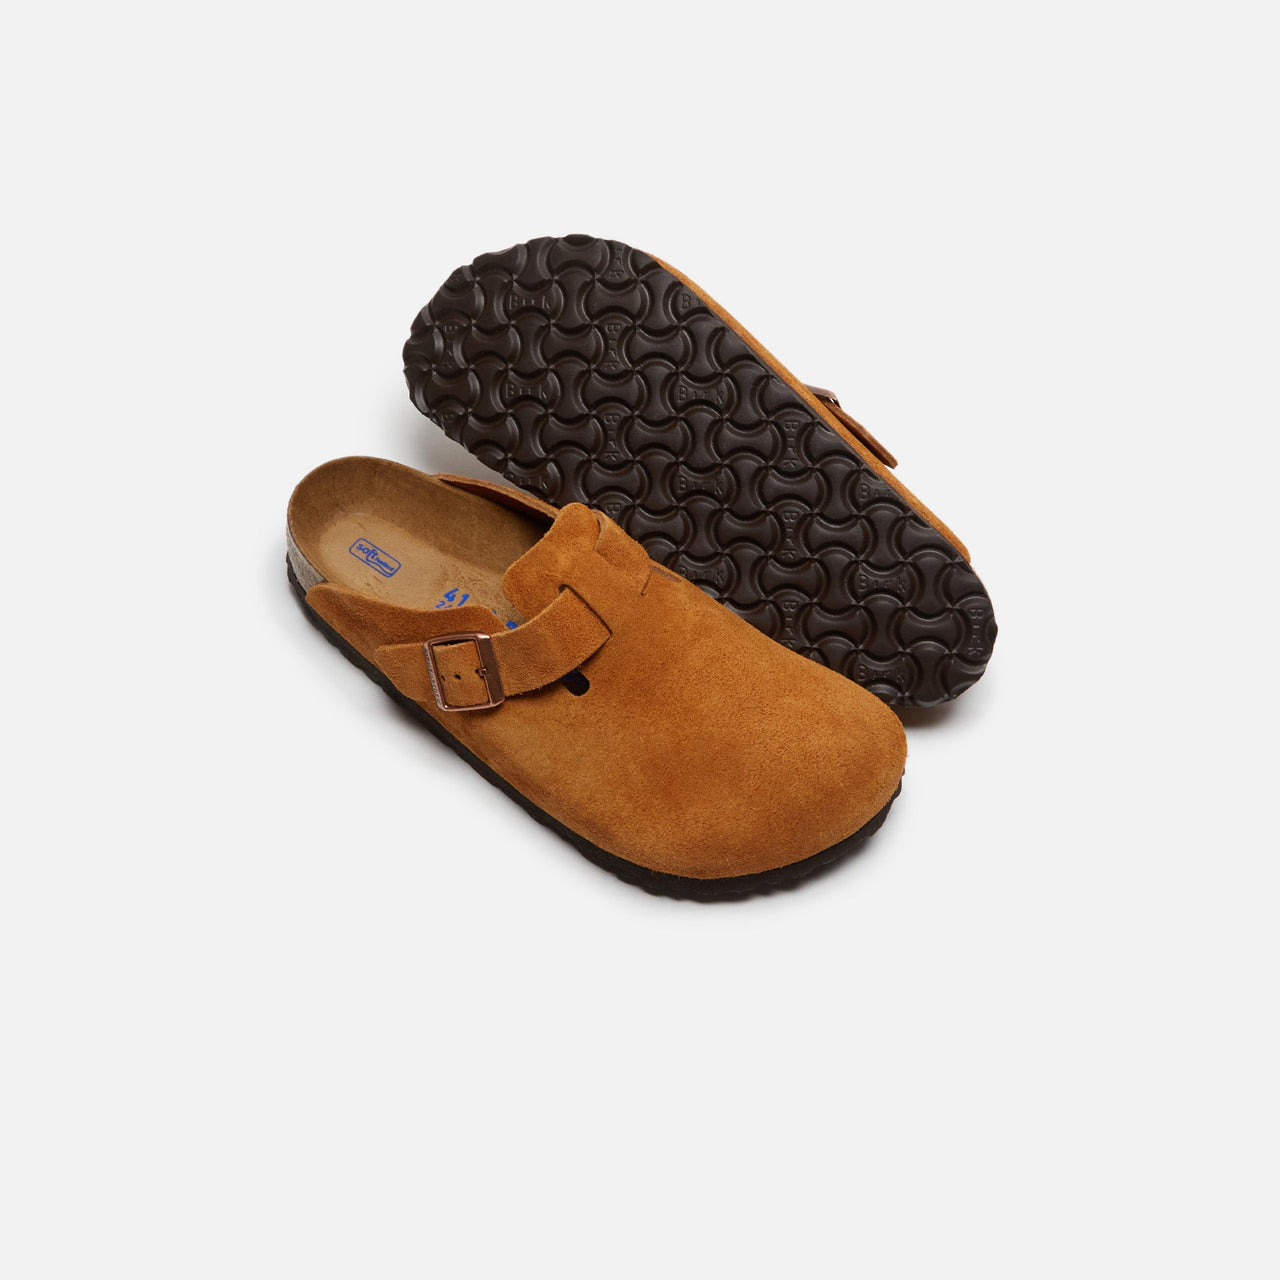  Mink suede clogs with roomy toe box and raised toe bar for natural gripping motion